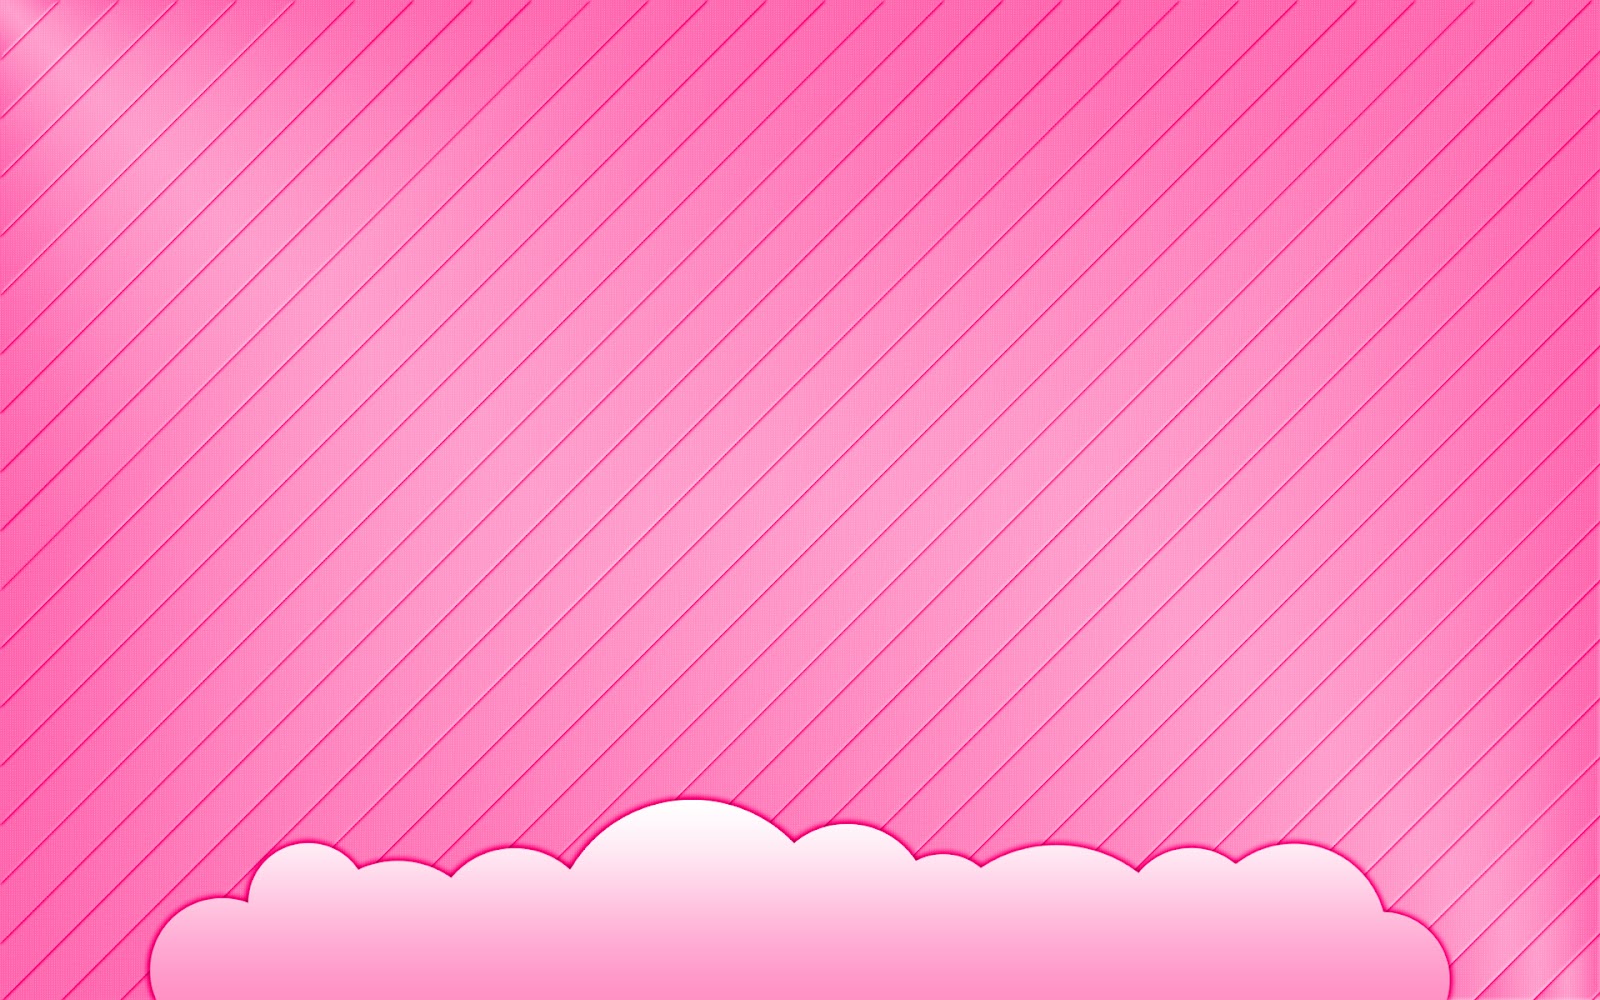 Abstract Pink Background with Clouds backgrounds